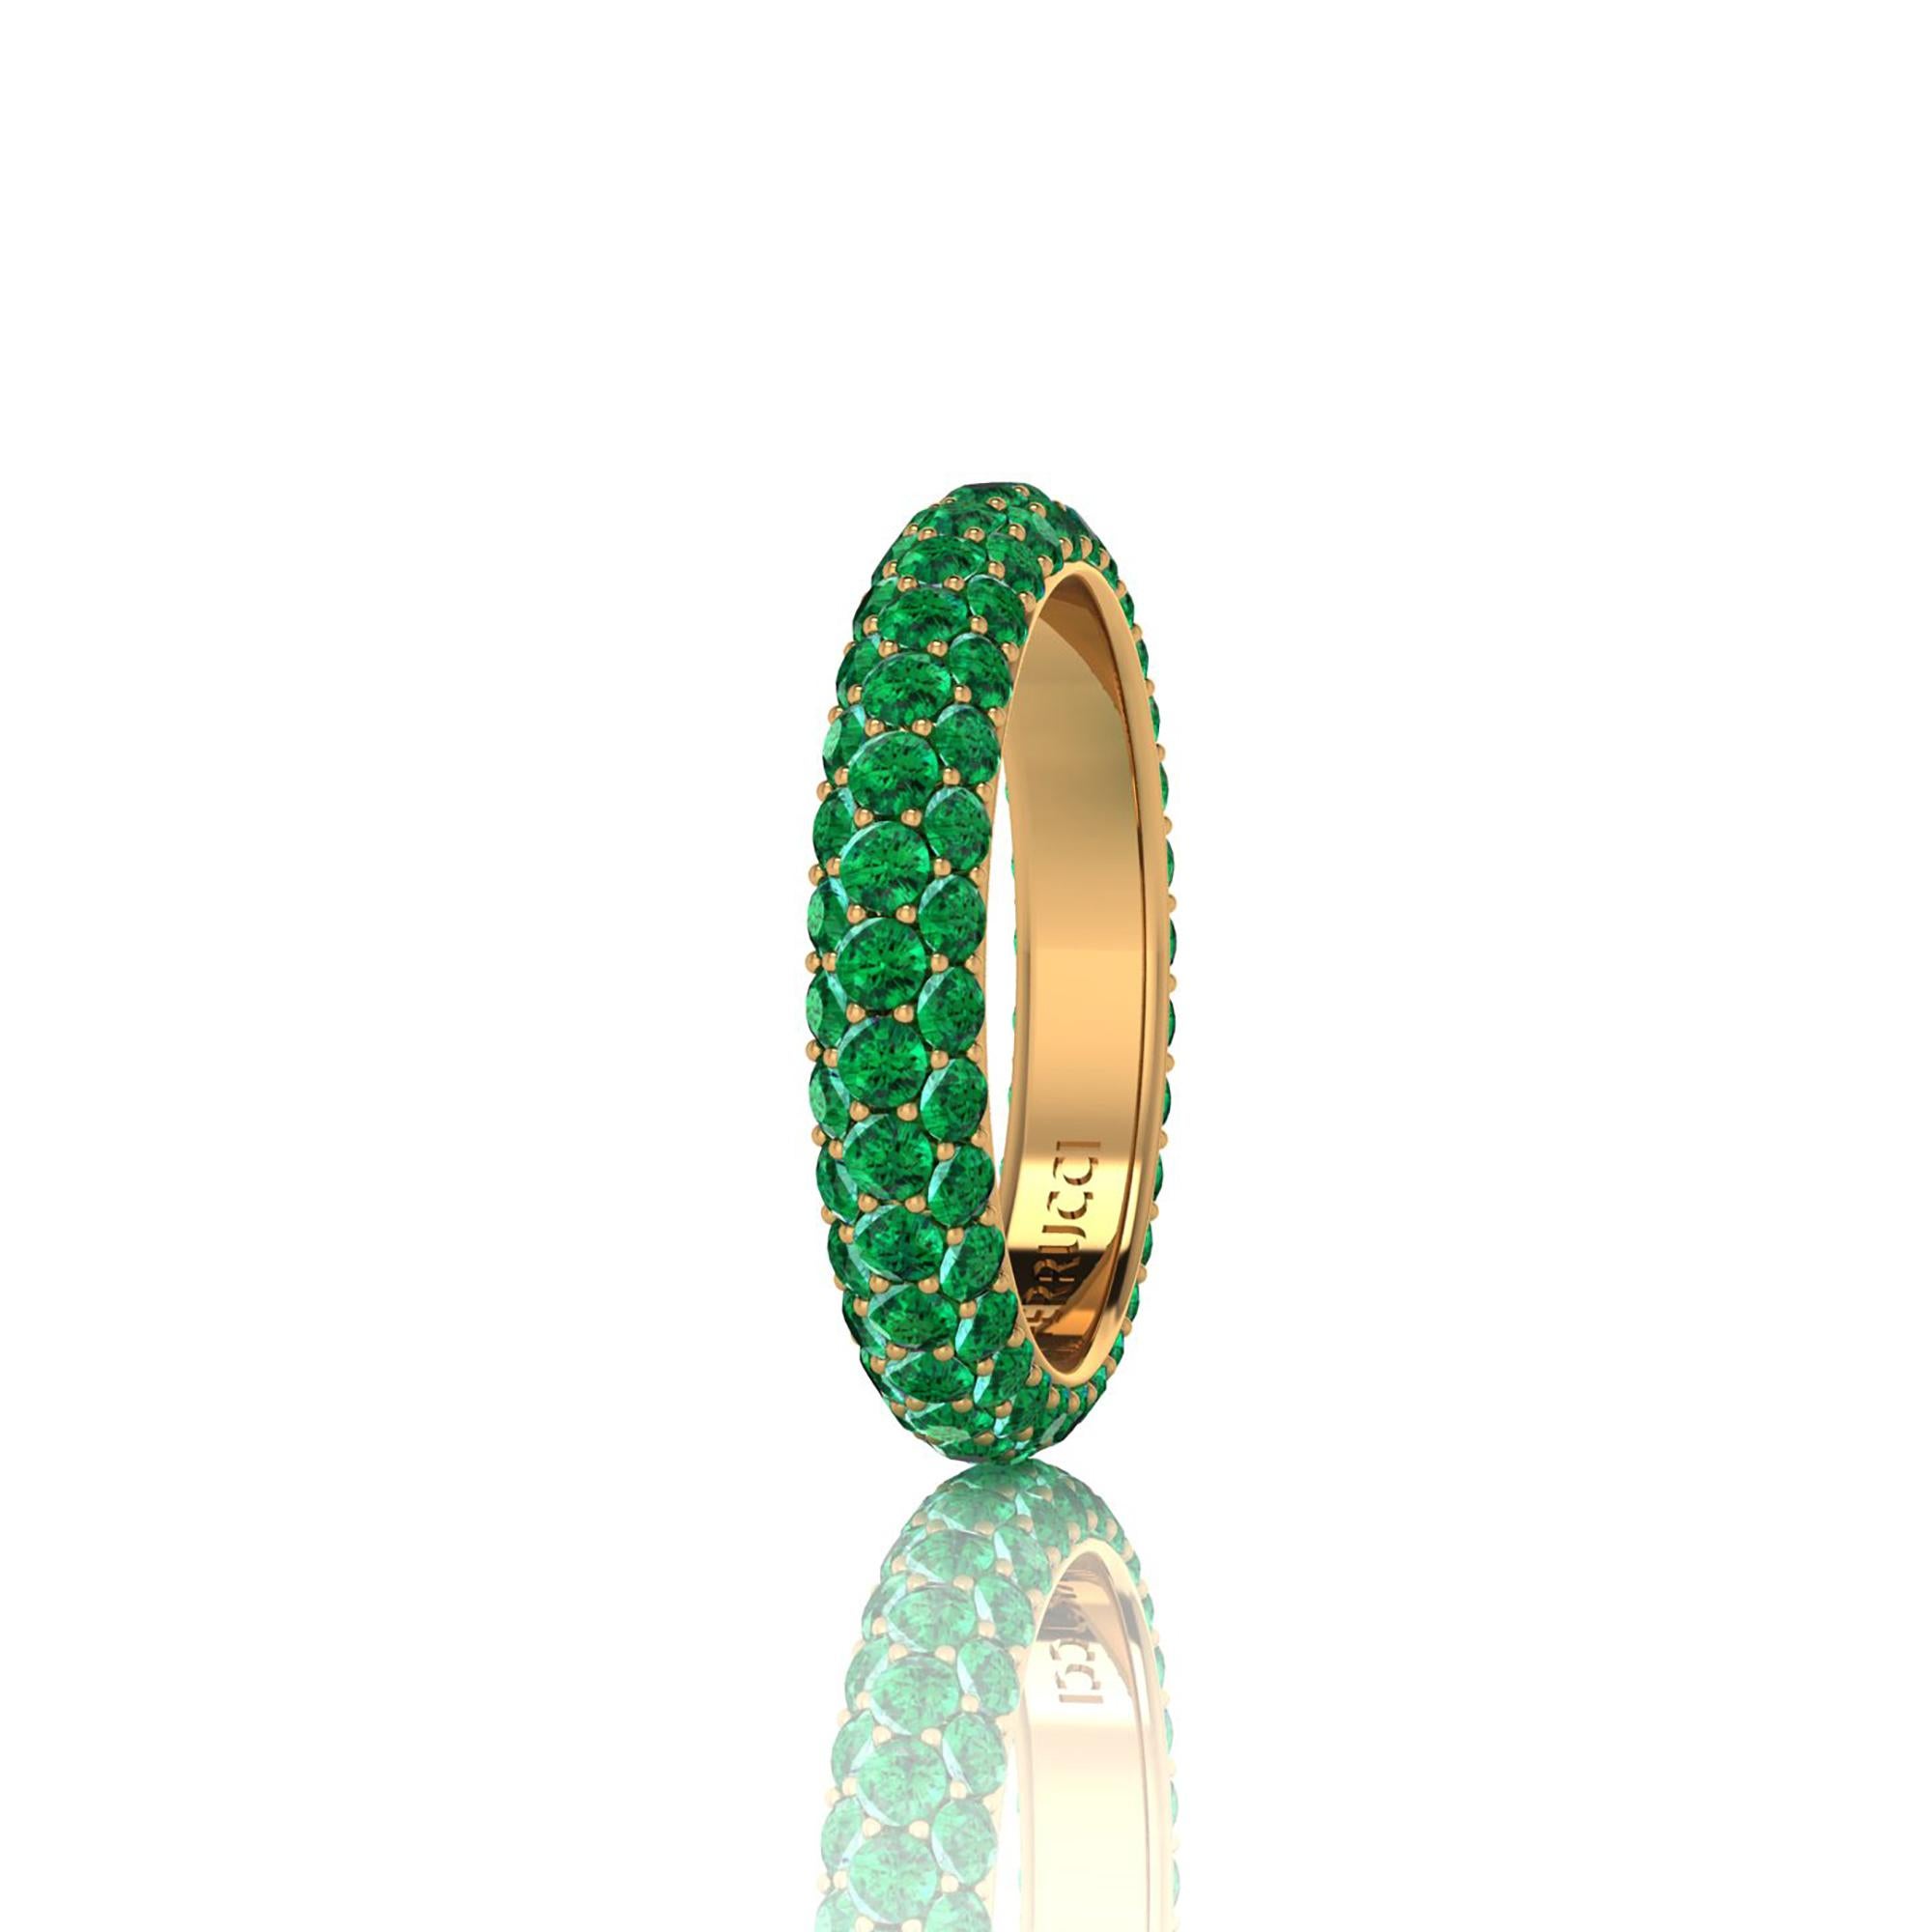 FERRUCCI green emerald eternity ring,  an approximate total carat weight of 2.00 carat, hand made in New York City with the best Italian craftsmanship, conceived in 18k yellow gold.
Classic, sophisticated, gorgeous look, everlasting in time